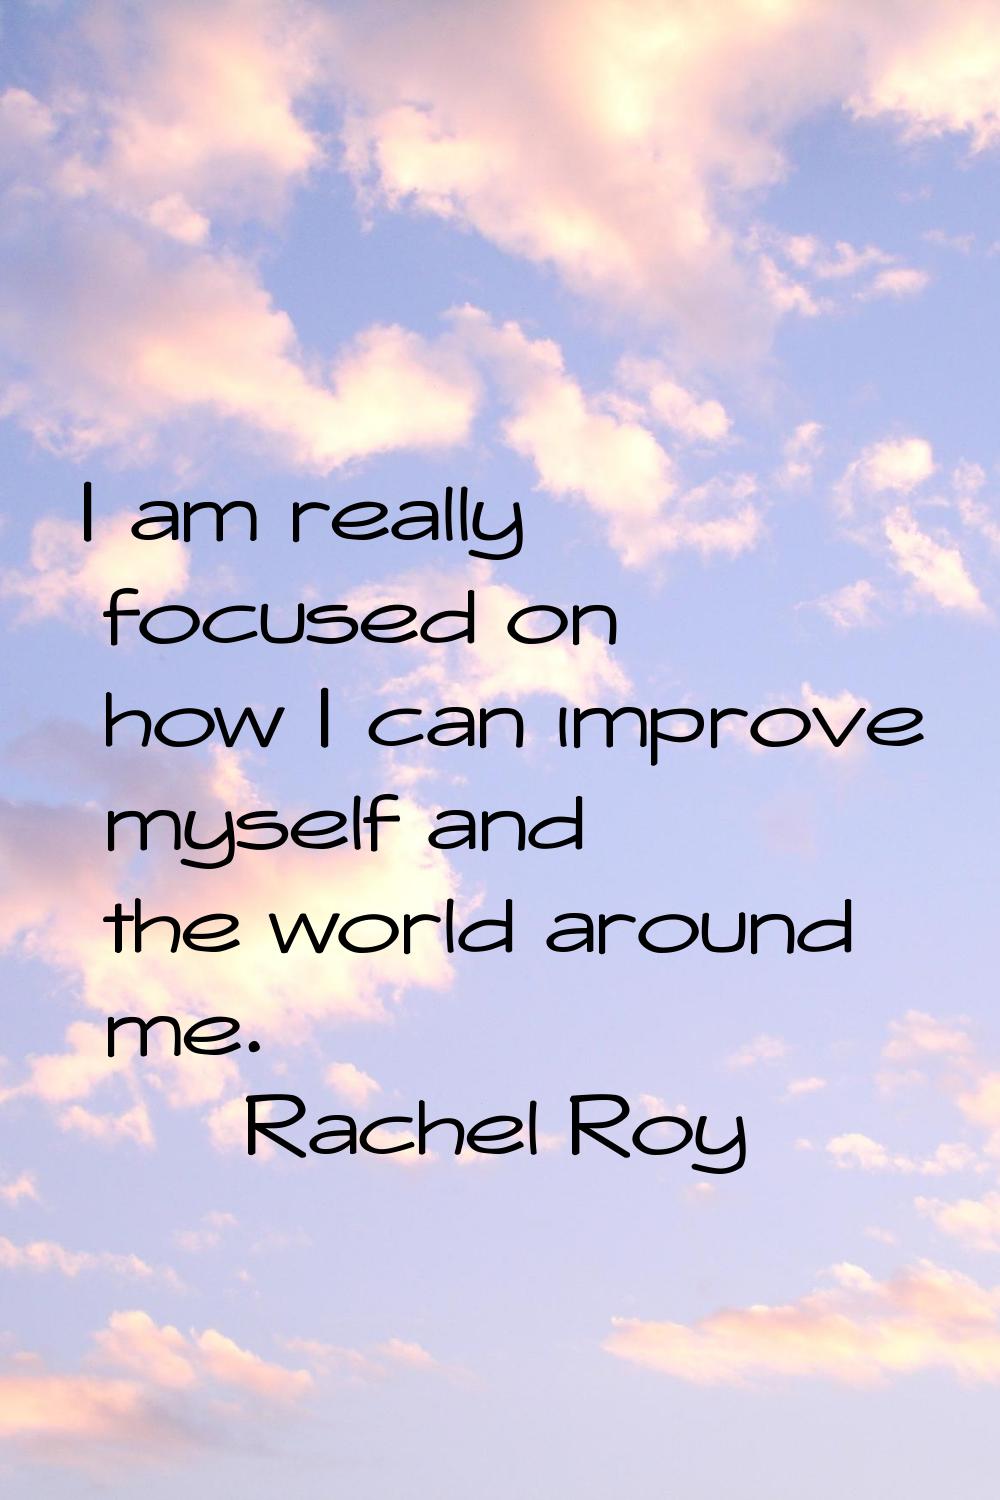 I am really focused on how I can improve myself and the world around me.